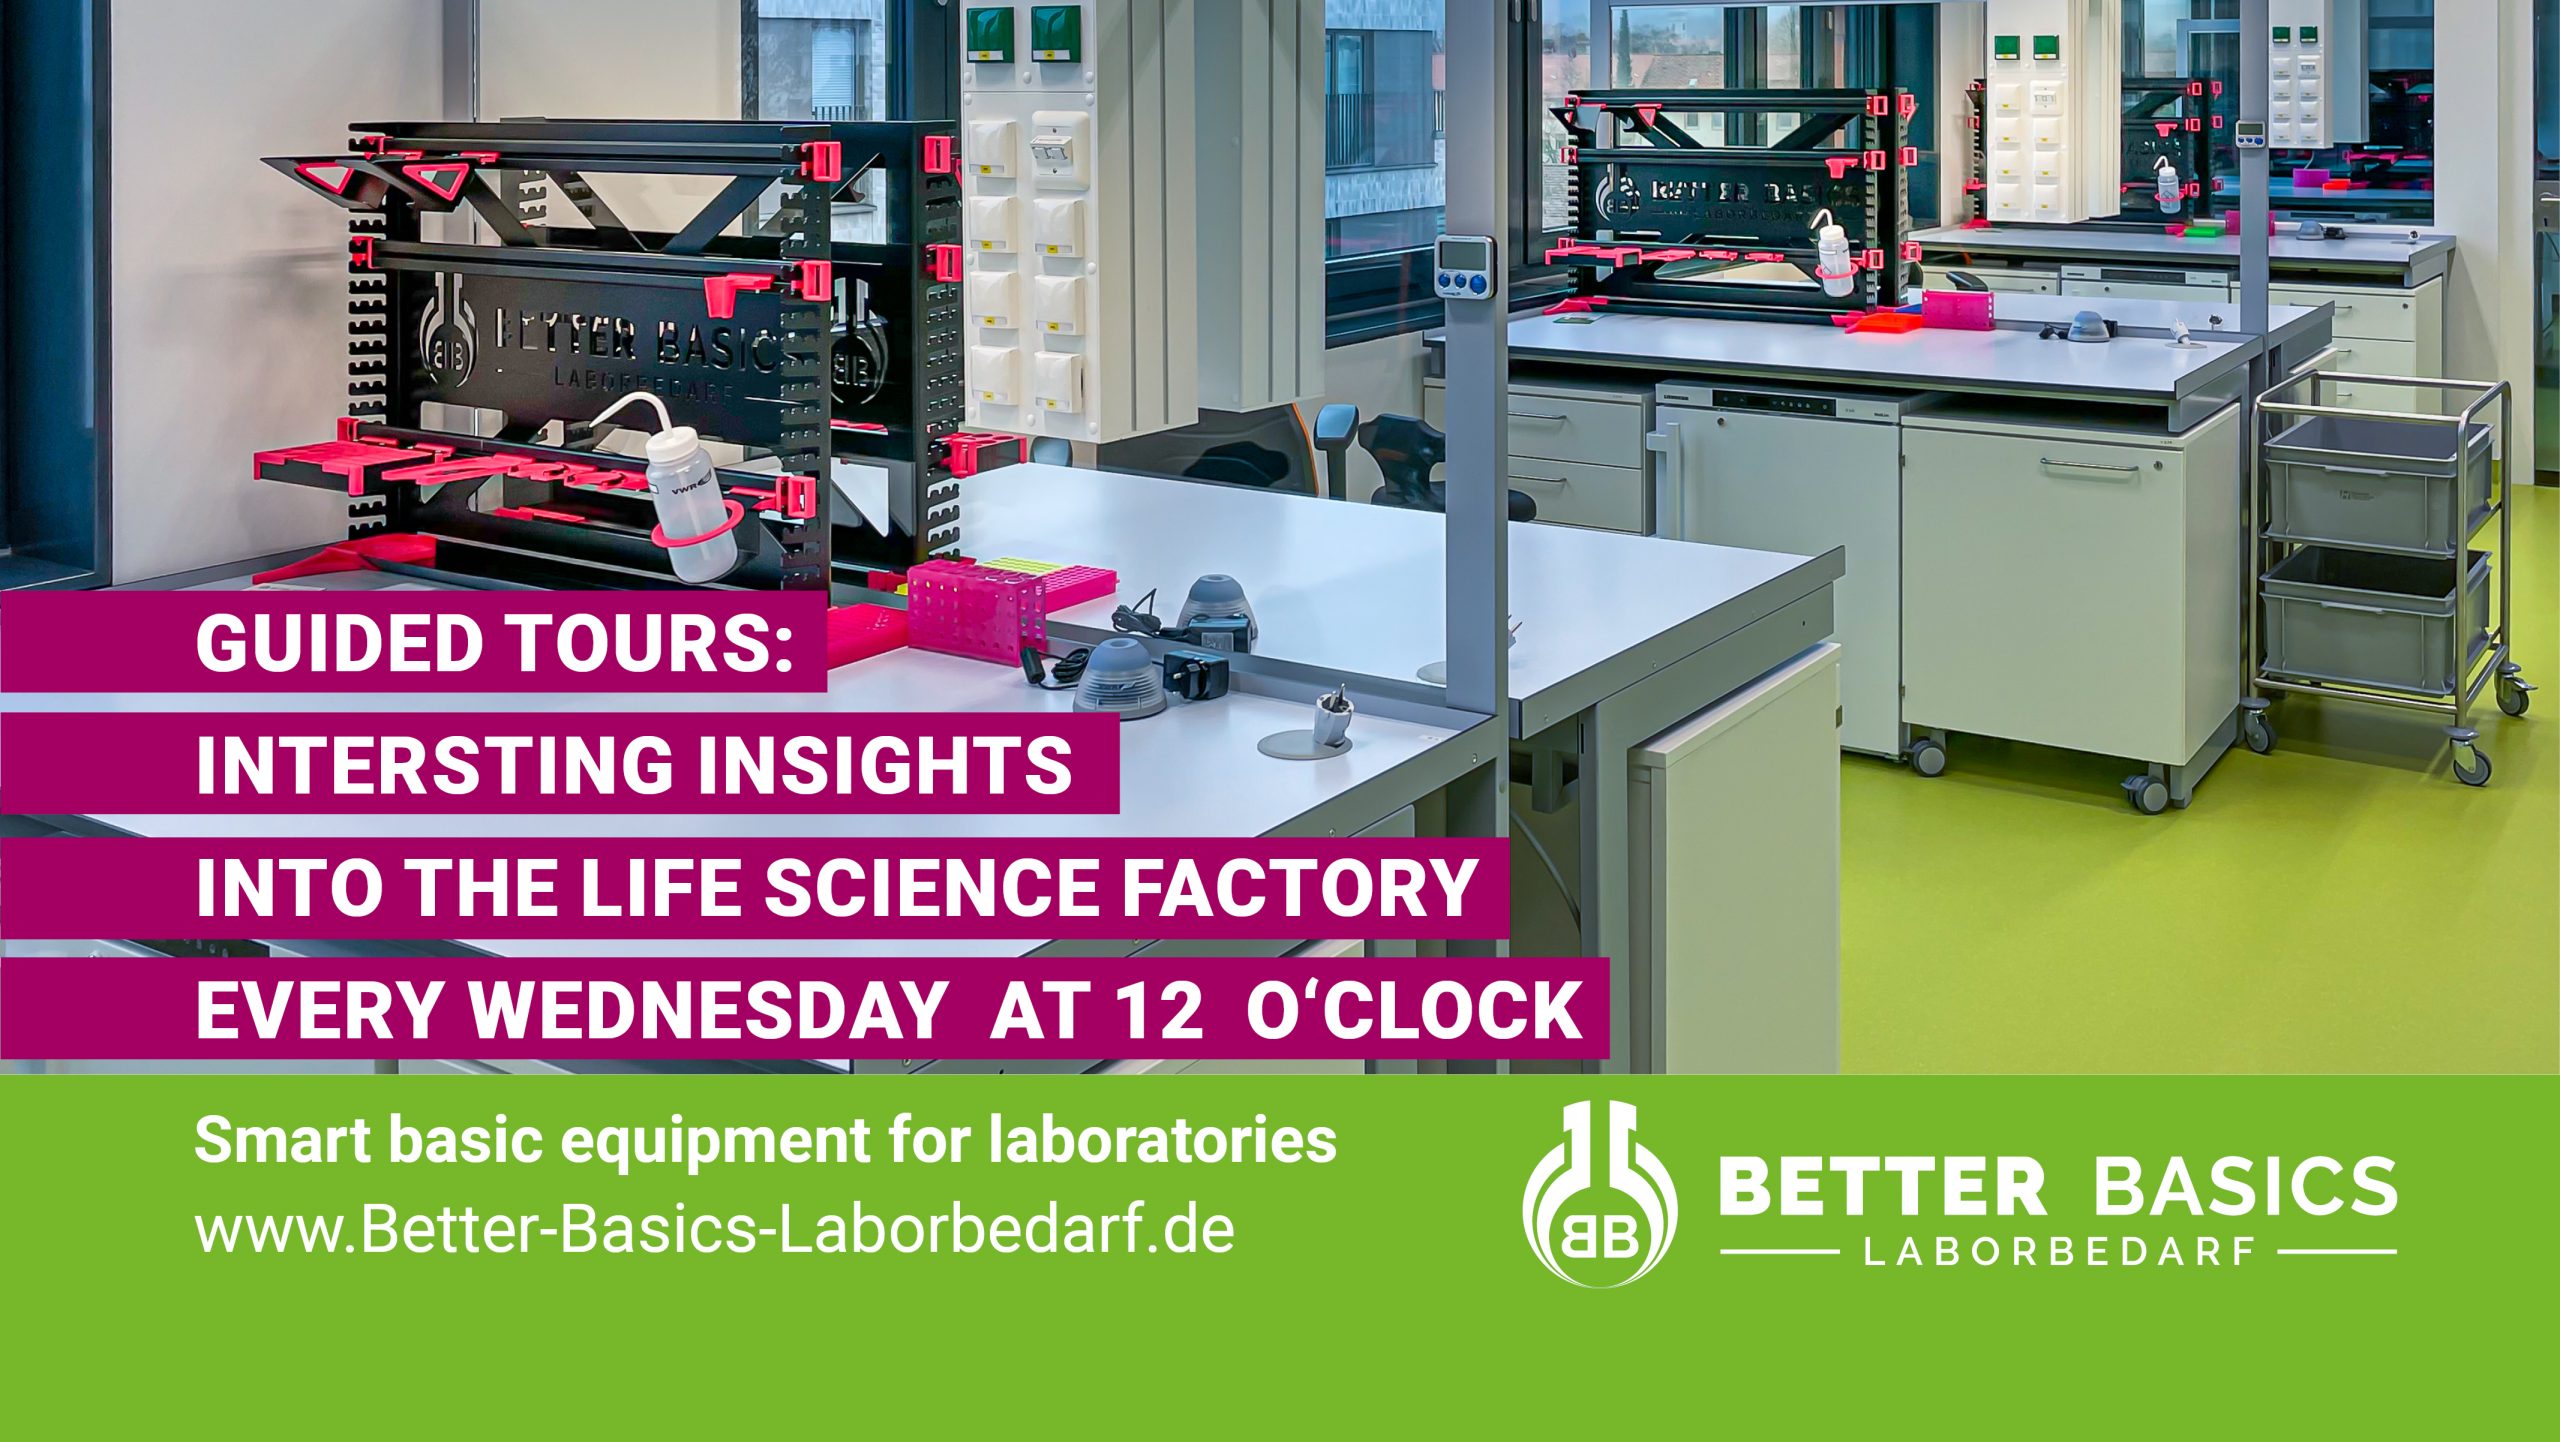 Better Basics Laborbedarf GmbH News Beitrag EN - Guided tours: interesting insights into the life science factory every wednesday at 12 o`clock